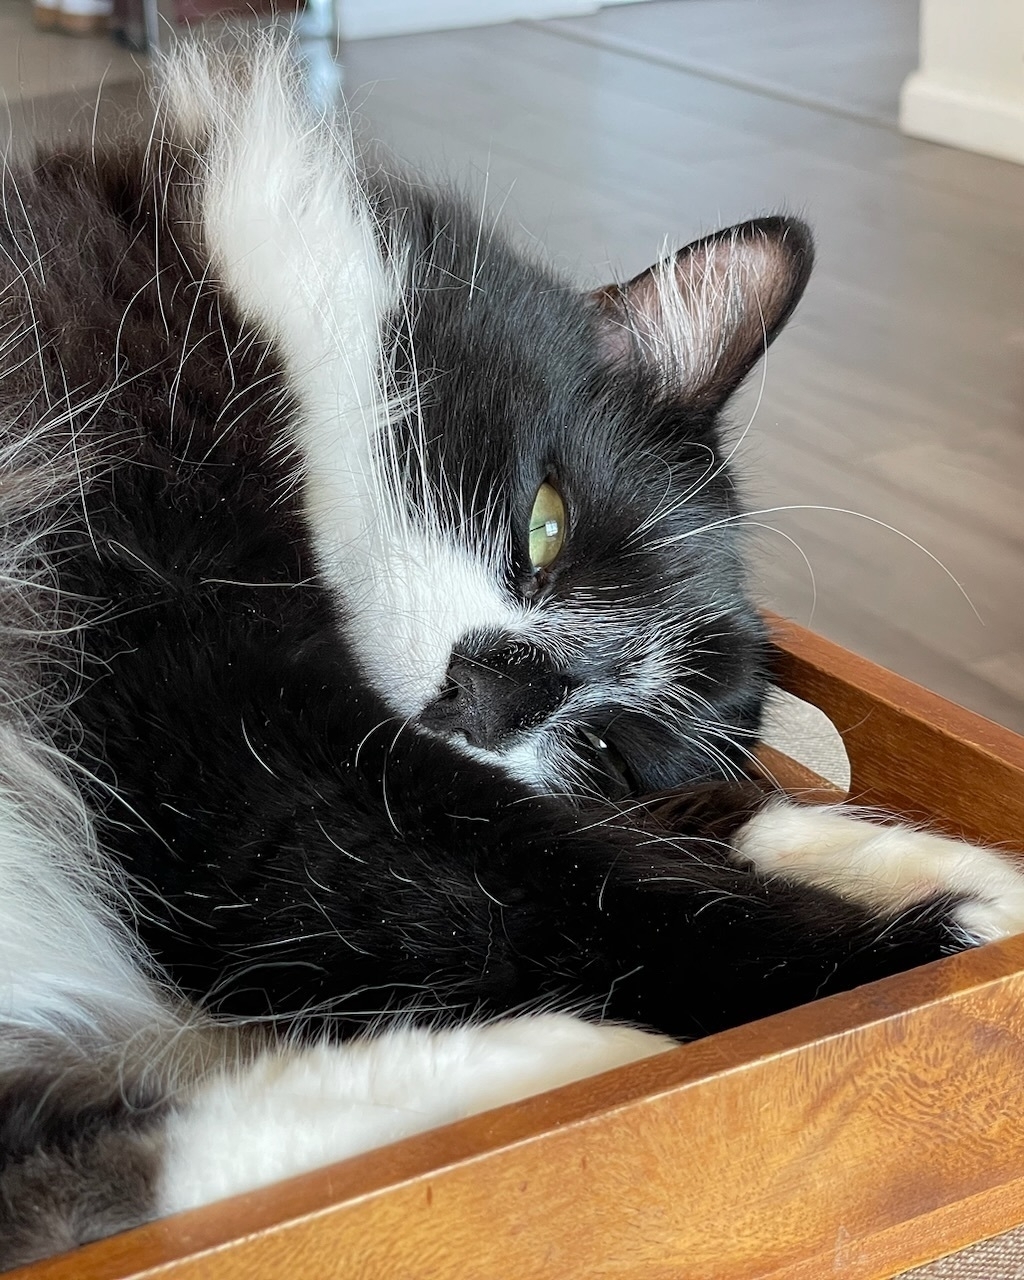 A black and white tuxedo cat laying comfortably in a wooden serving tray, looking off into the distance through half-open eyes.